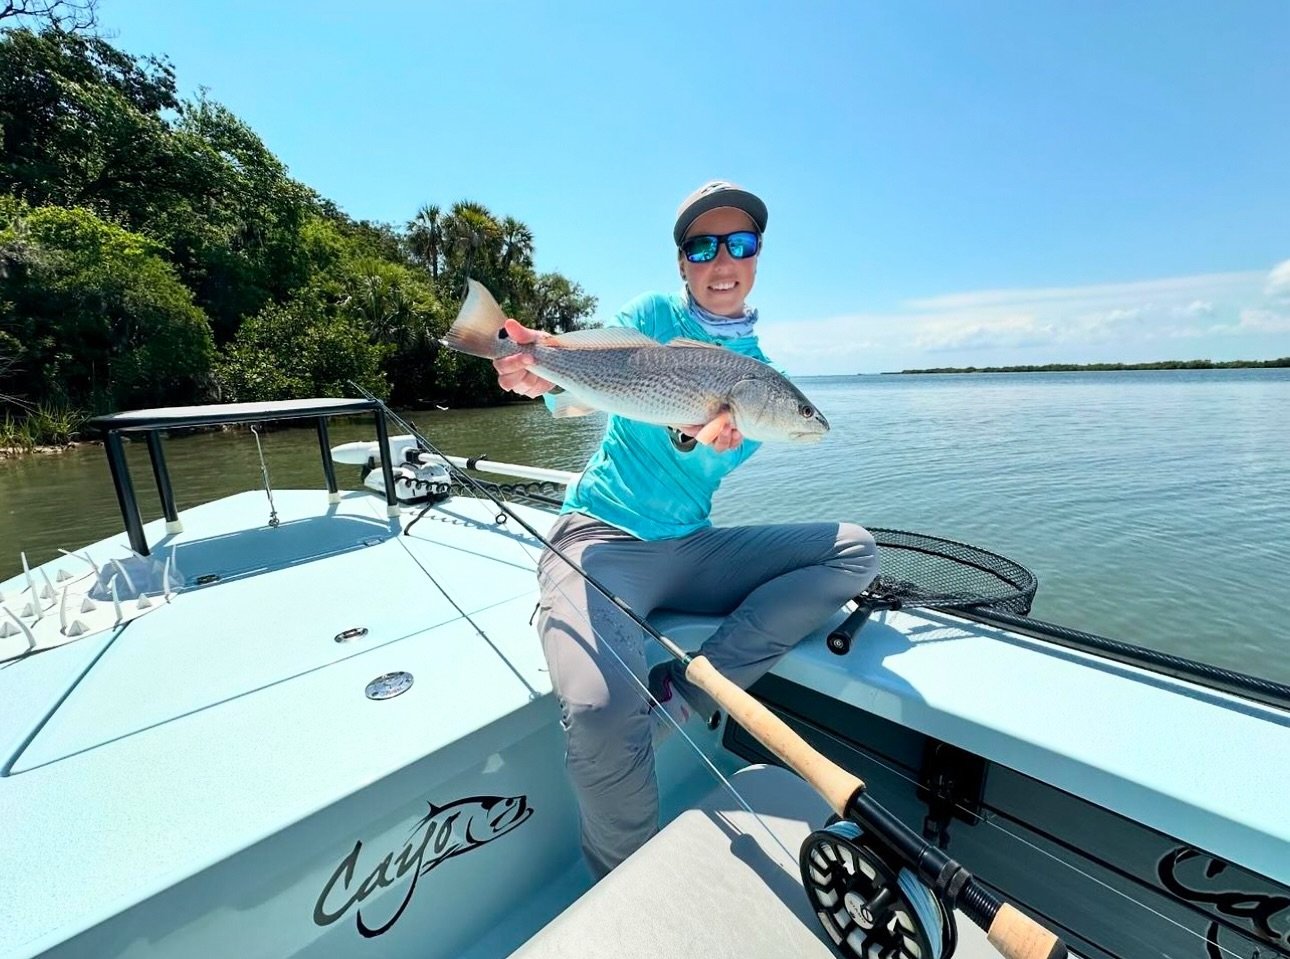 &ldquo;We finally made it out on our new @cayoboatworks skiff! We are loving the boat and how well it handles on choppy water.

I&rsquo;m grateful to have caught this nice little redfish as the fishing was a little tough yesterday.&rdquo; @laurel._.k